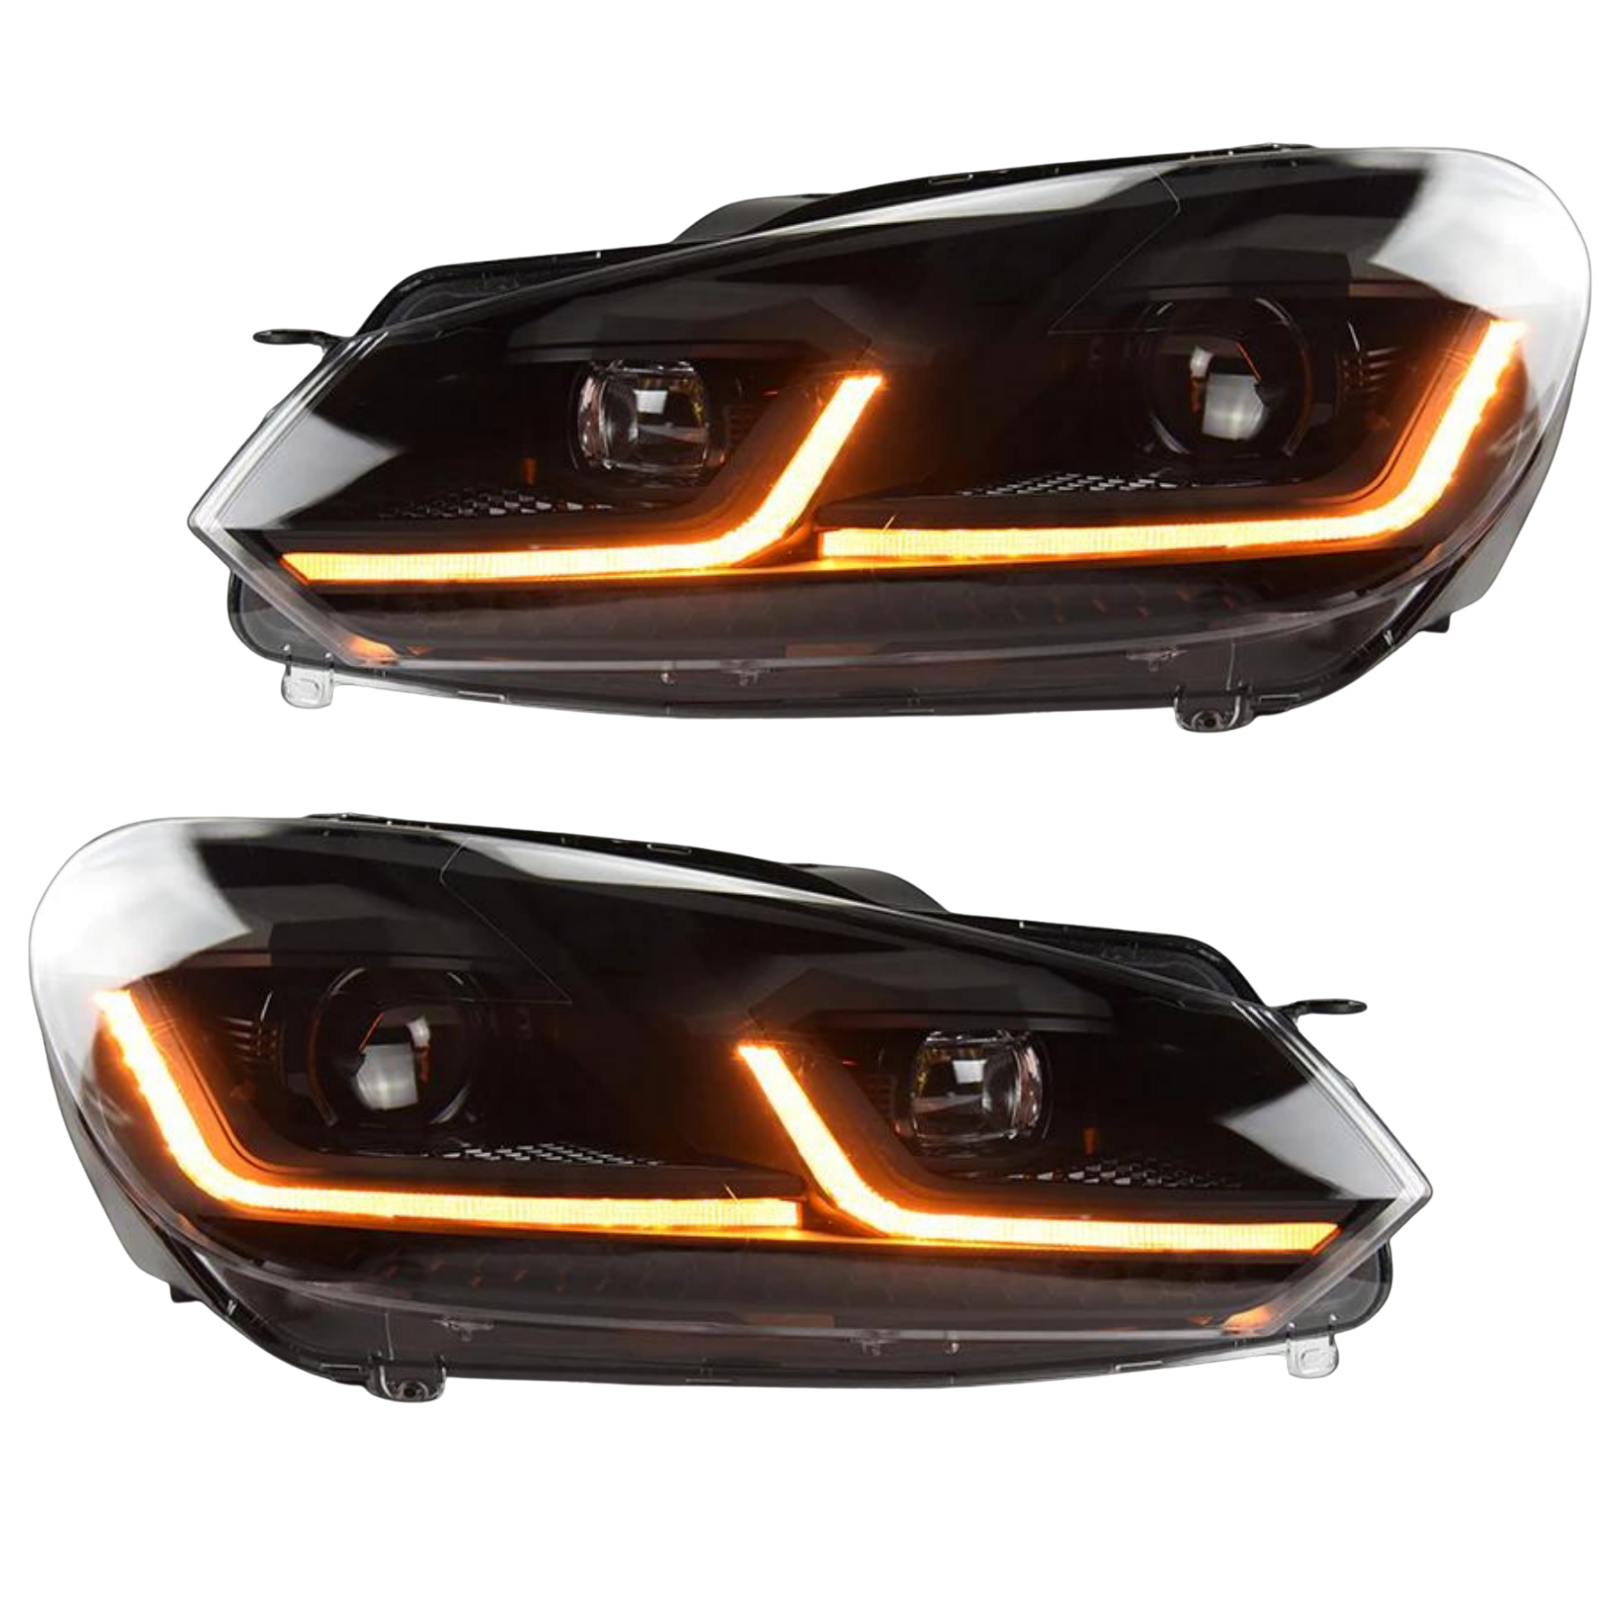 VW MK7.5 GOLF BLACKOUT STYLE SEQUENTIAL HEADLIGHTS - SUIT VW MK6 GOLF